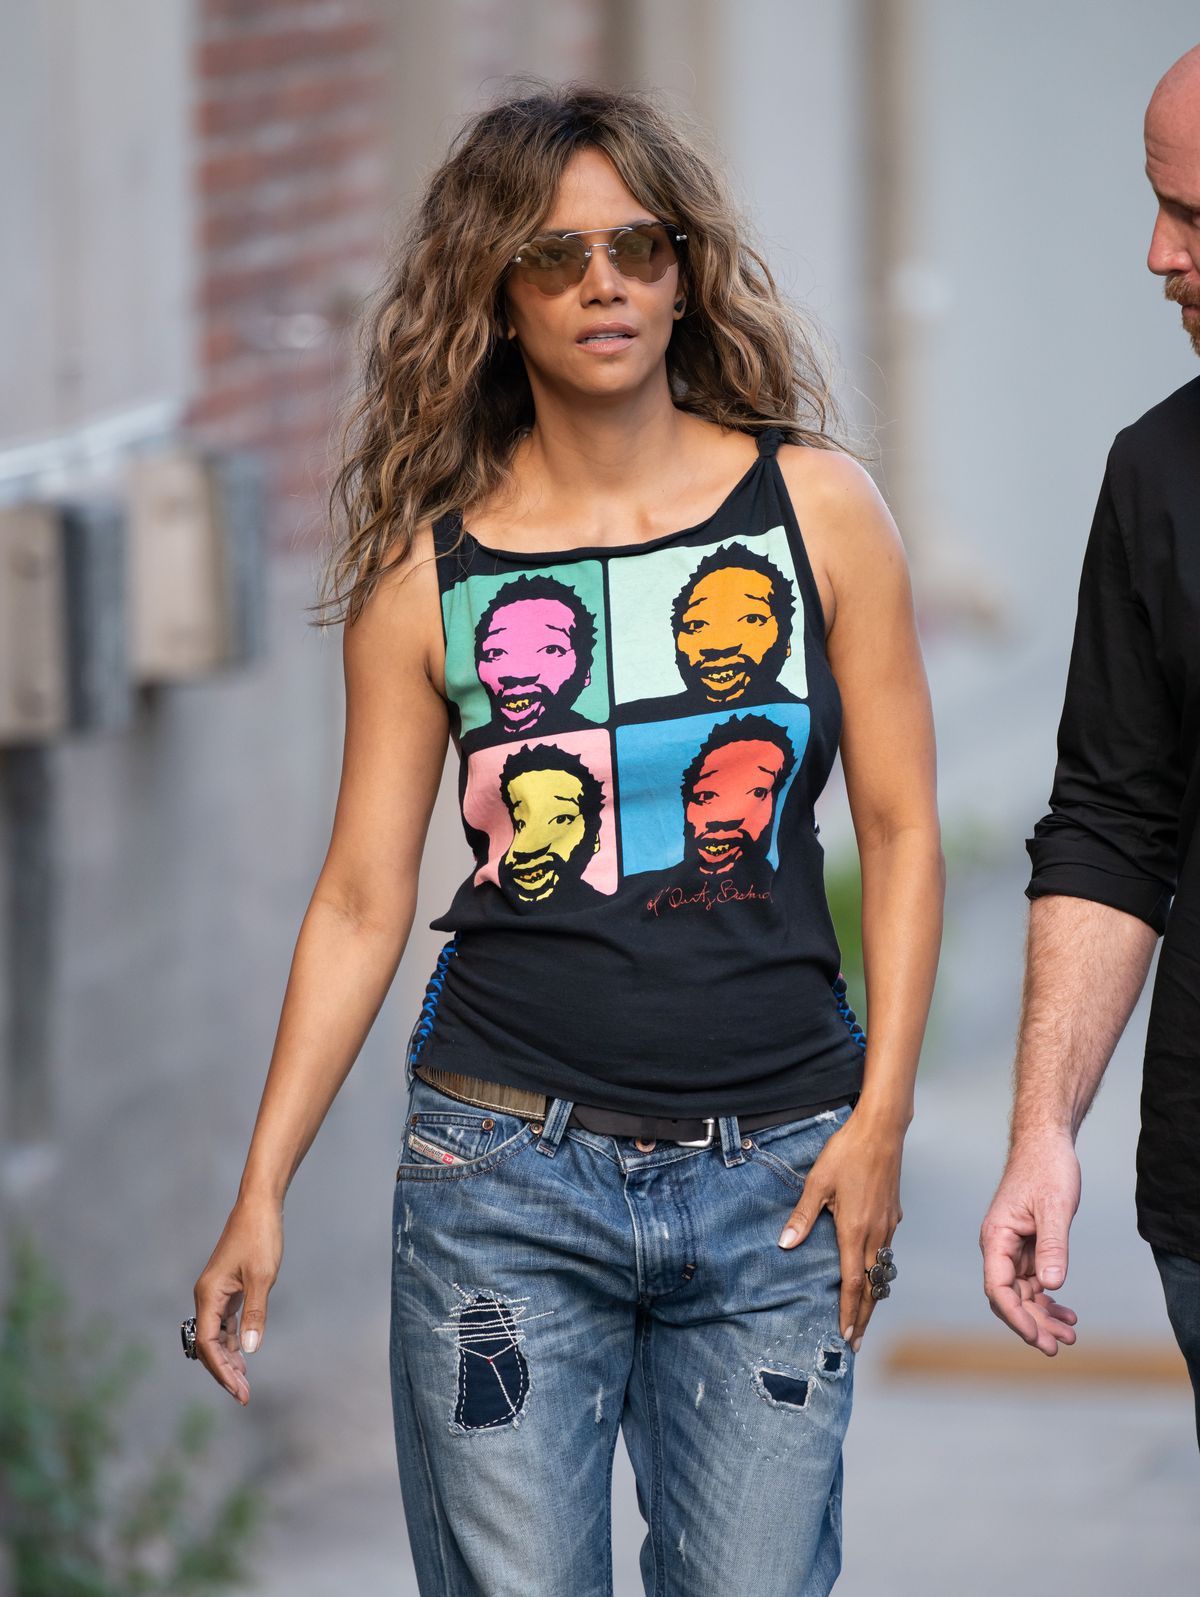 Halle Berry seen at "Jimmy Kimmel Live" on May 22, 2019, in Los Angeles, California | Photo: RB/Bauer-Griffin/GC Images/Getty Images